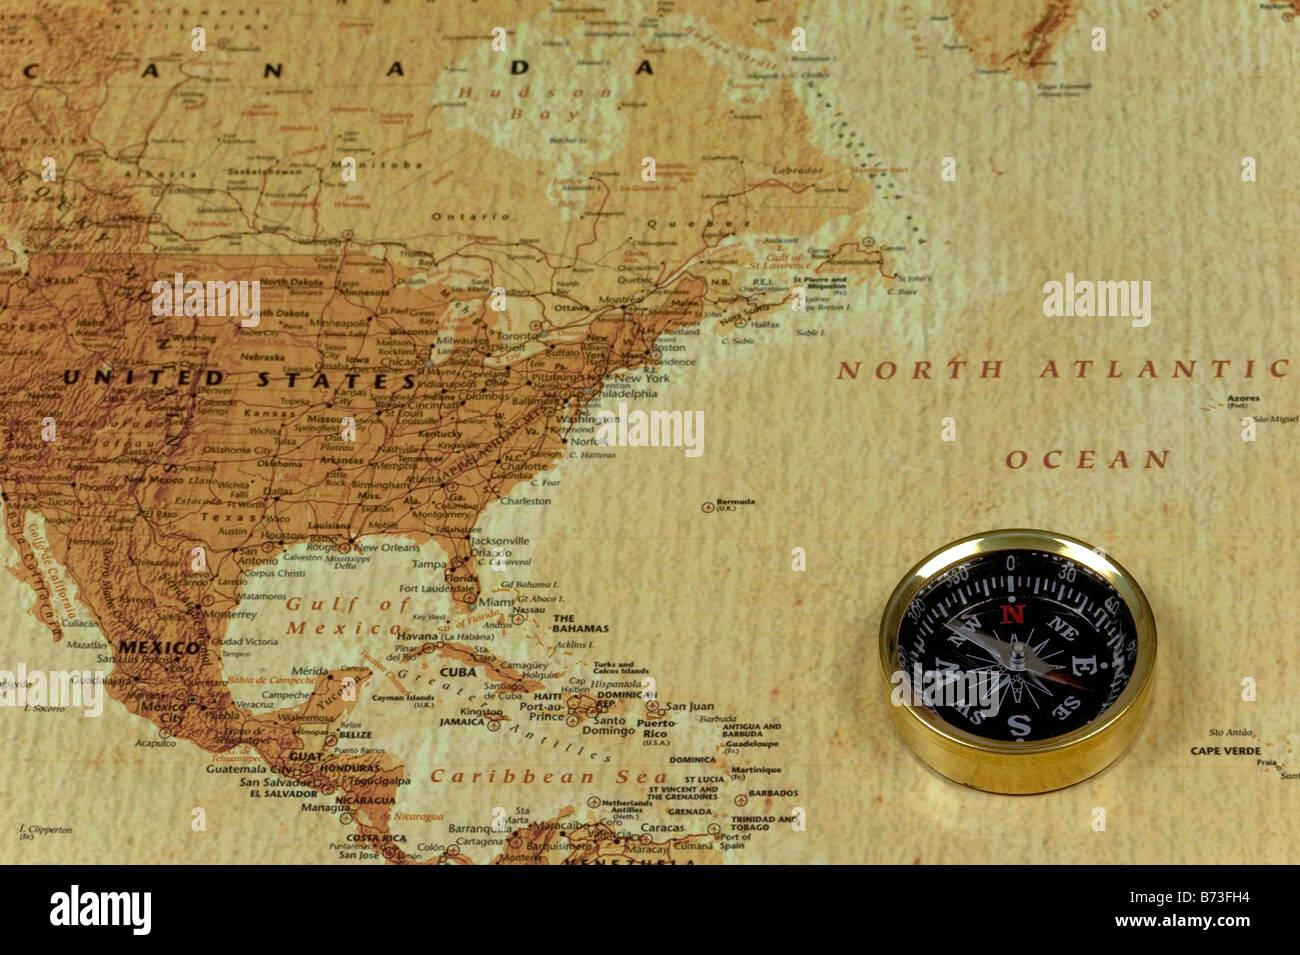 A brss compass on an old map showing the North Atlantic ocean and the United States of America Stock Photo